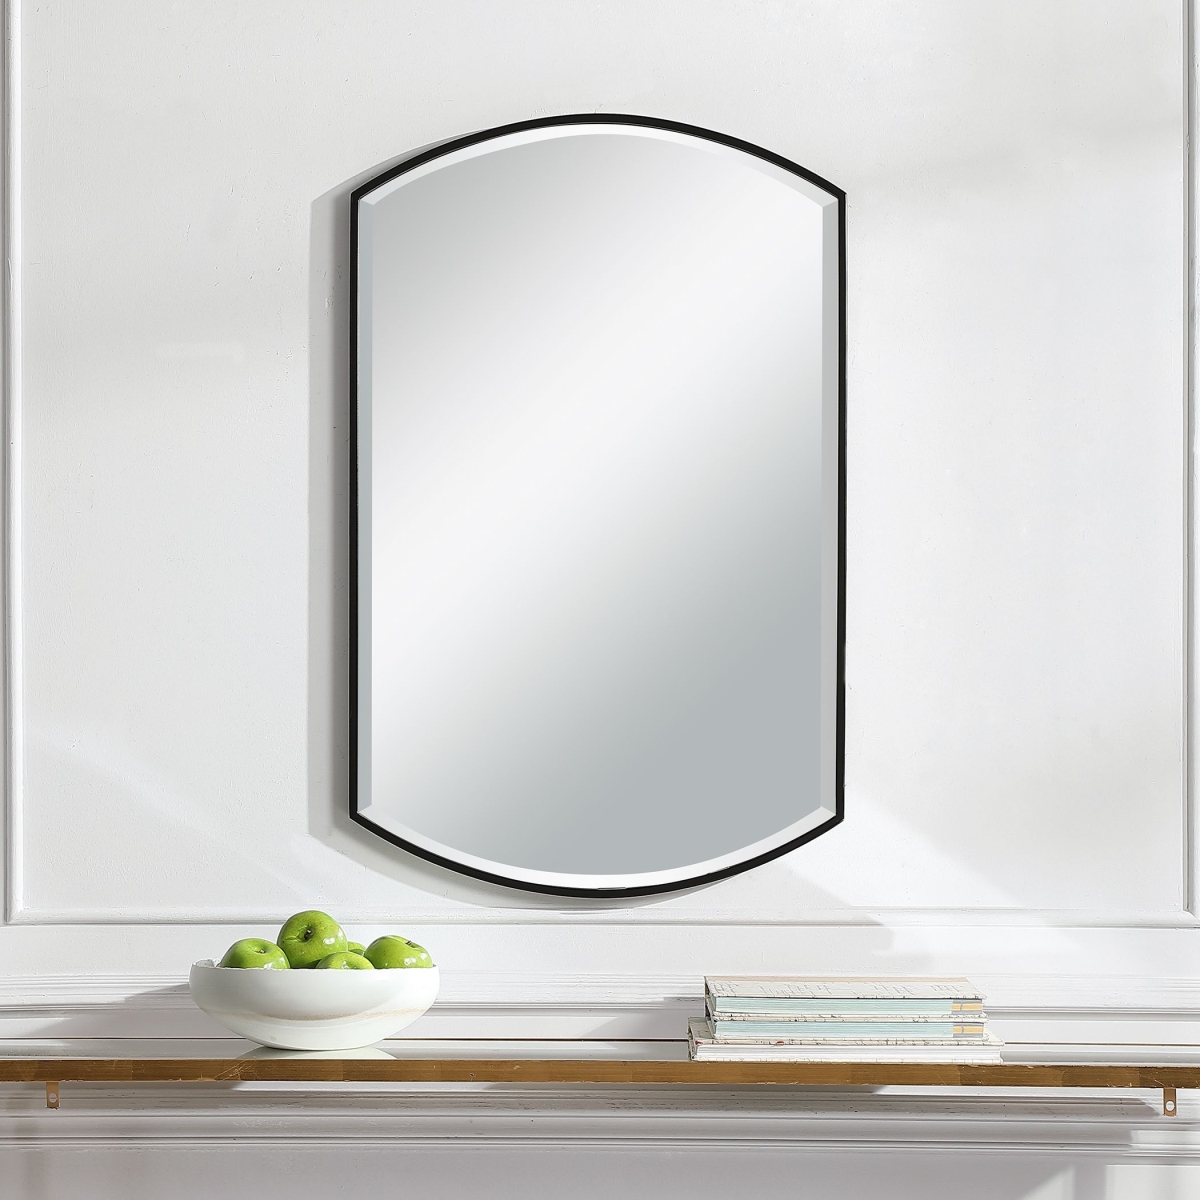 Picture of 212 Main 09705 42.13 x 28.375 x 3.15 in. Shield Shaped Iron Mirror